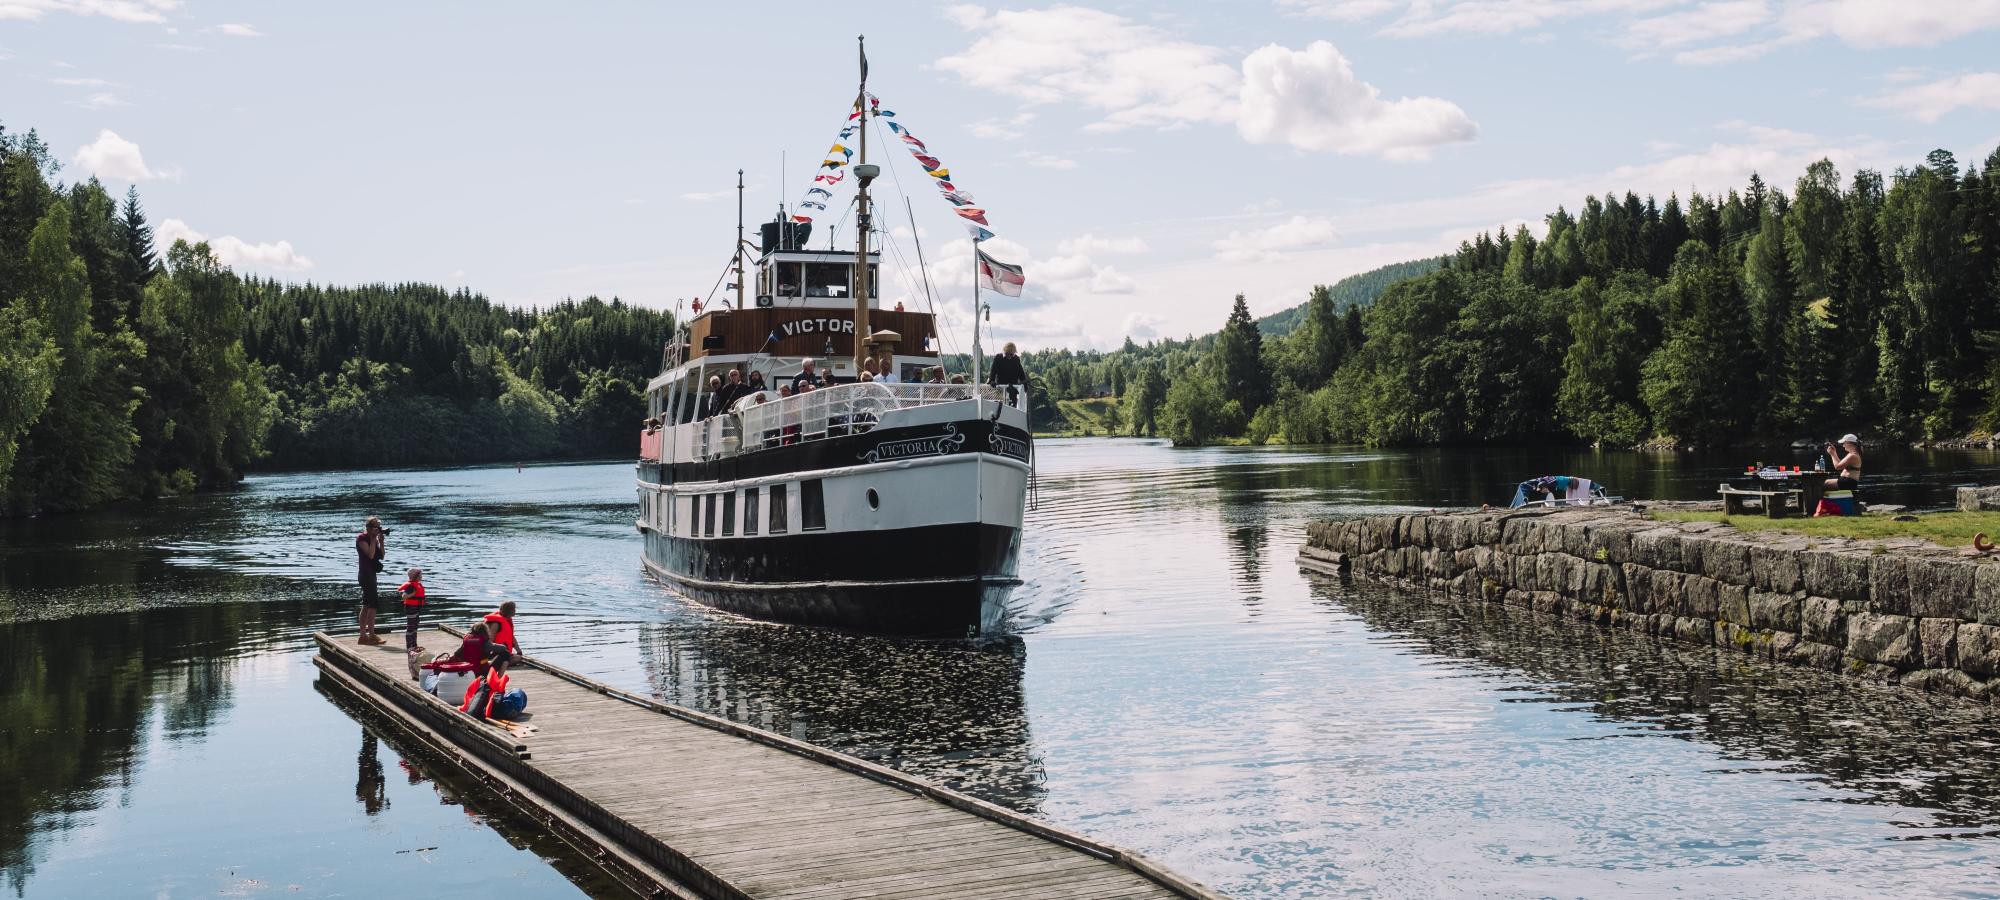 Straand Hotel – Canal package from Skien